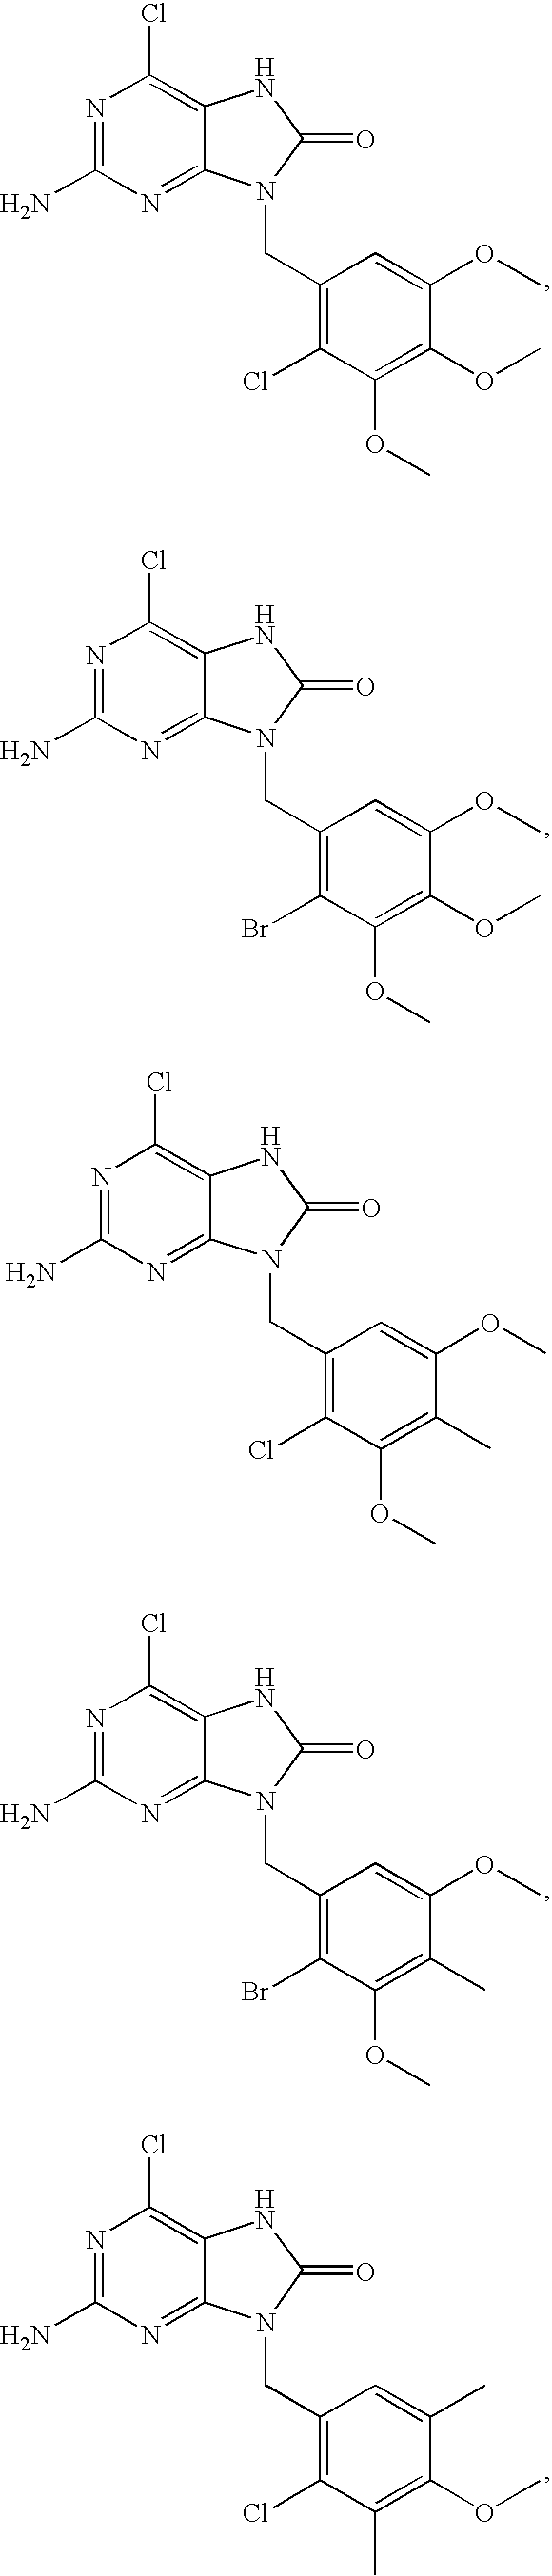 7,9-Dihydro-Purin-8-One and Related Analogs as HSP90-Inhibitors